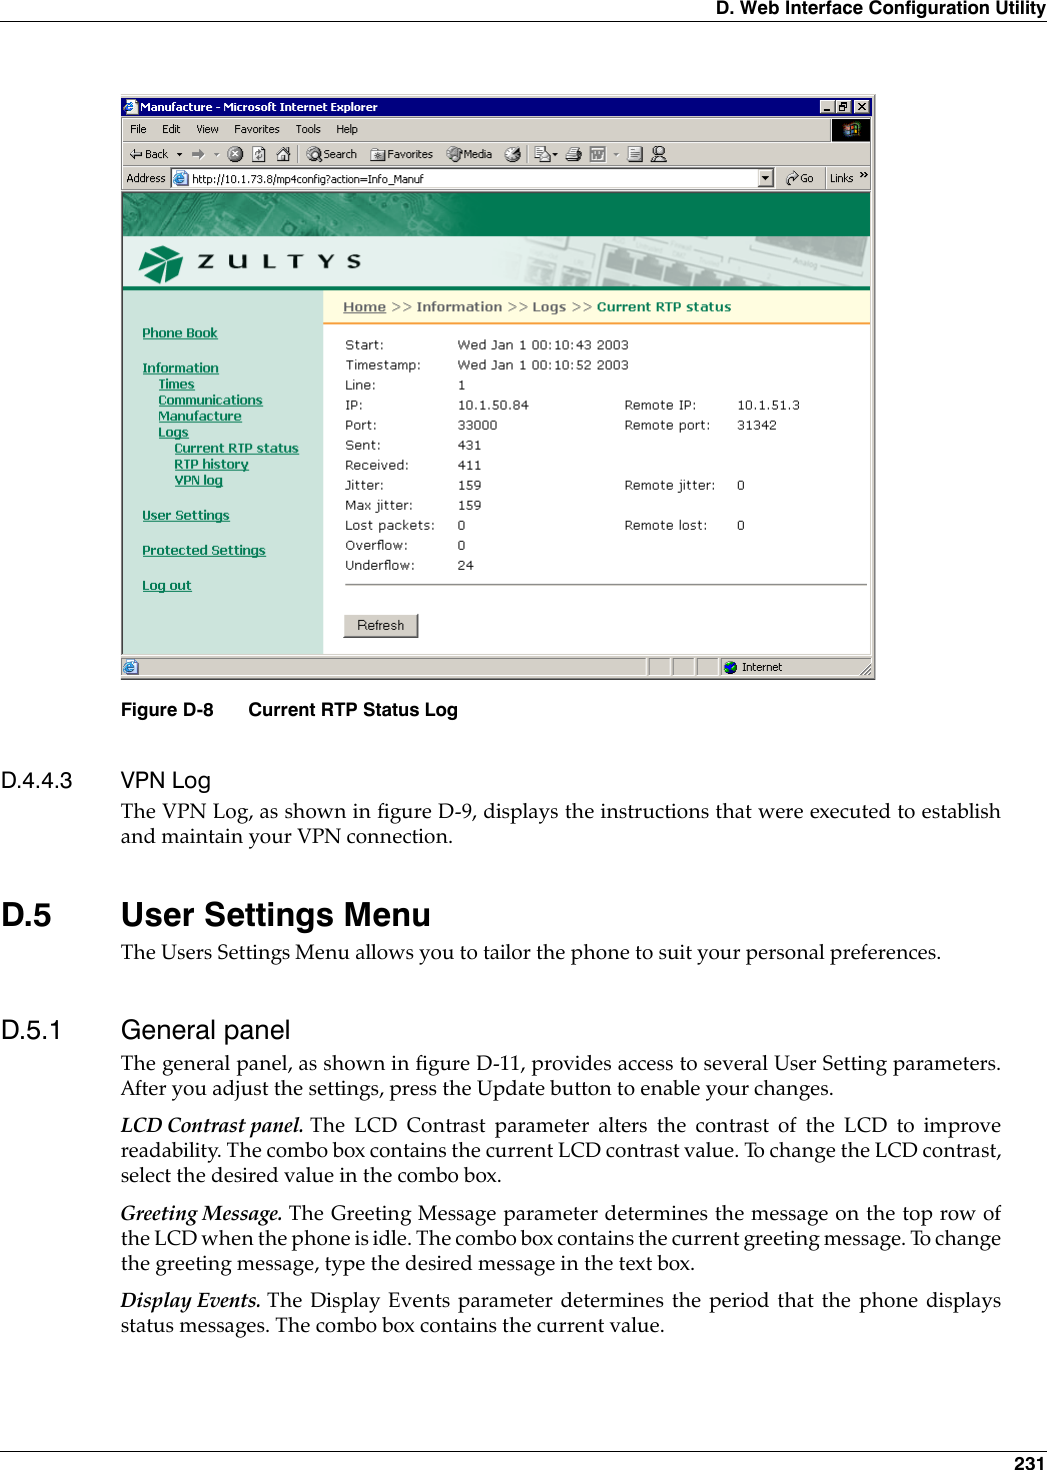 D. Web Interface Configuration Utility 231D.4.4.3 VPN LogThe VPN Log, as shown in figure D-9, displays the instructions that were executed to establishand maintain your VPN connection.D.5 User Settings MenuThe Users Settings Menu allows you to tailor the phone to suit your personal preferences.D.5.1 General panelThe general panel, as shown in figure D-11, provides access to several User Setting parameters.After you adjust the settings, press the Update button to enable your changes.LCD Contrast panel. The LCD Contrast parameter alters the contrast of the LCD to improvereadability. The combo box contains the current LCD contrast value. To change the LCD contrast,select the desired value in the combo box.Greeting Message. The Greeting Message parameter determines the message on the top row ofthe LCD when the phone is idle. The combo box contains the current greeting message. To changethe greeting message, type the desired message in the text box.Display Events. The Display Events parameter determines the period that the phone displaysstatus messages. The combo box contains the current value.Figure D-8 Current RTP Status Log